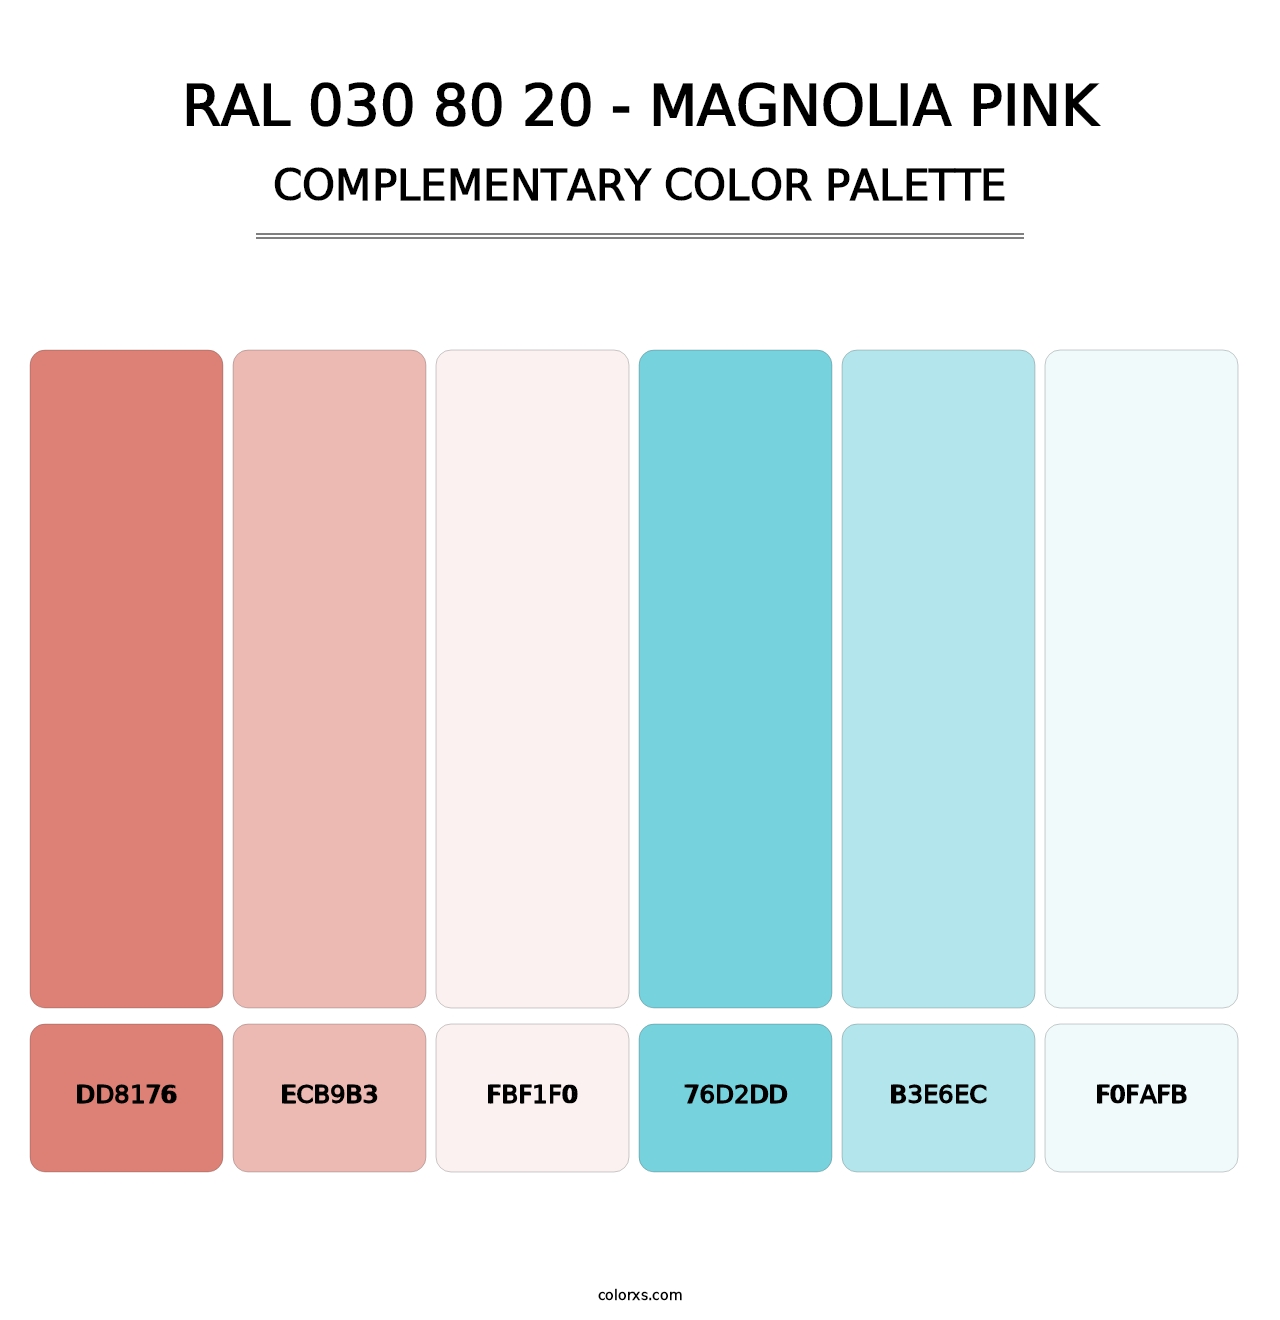 RAL 030 80 20 - Magnolia Pink - Complementary Color Palette